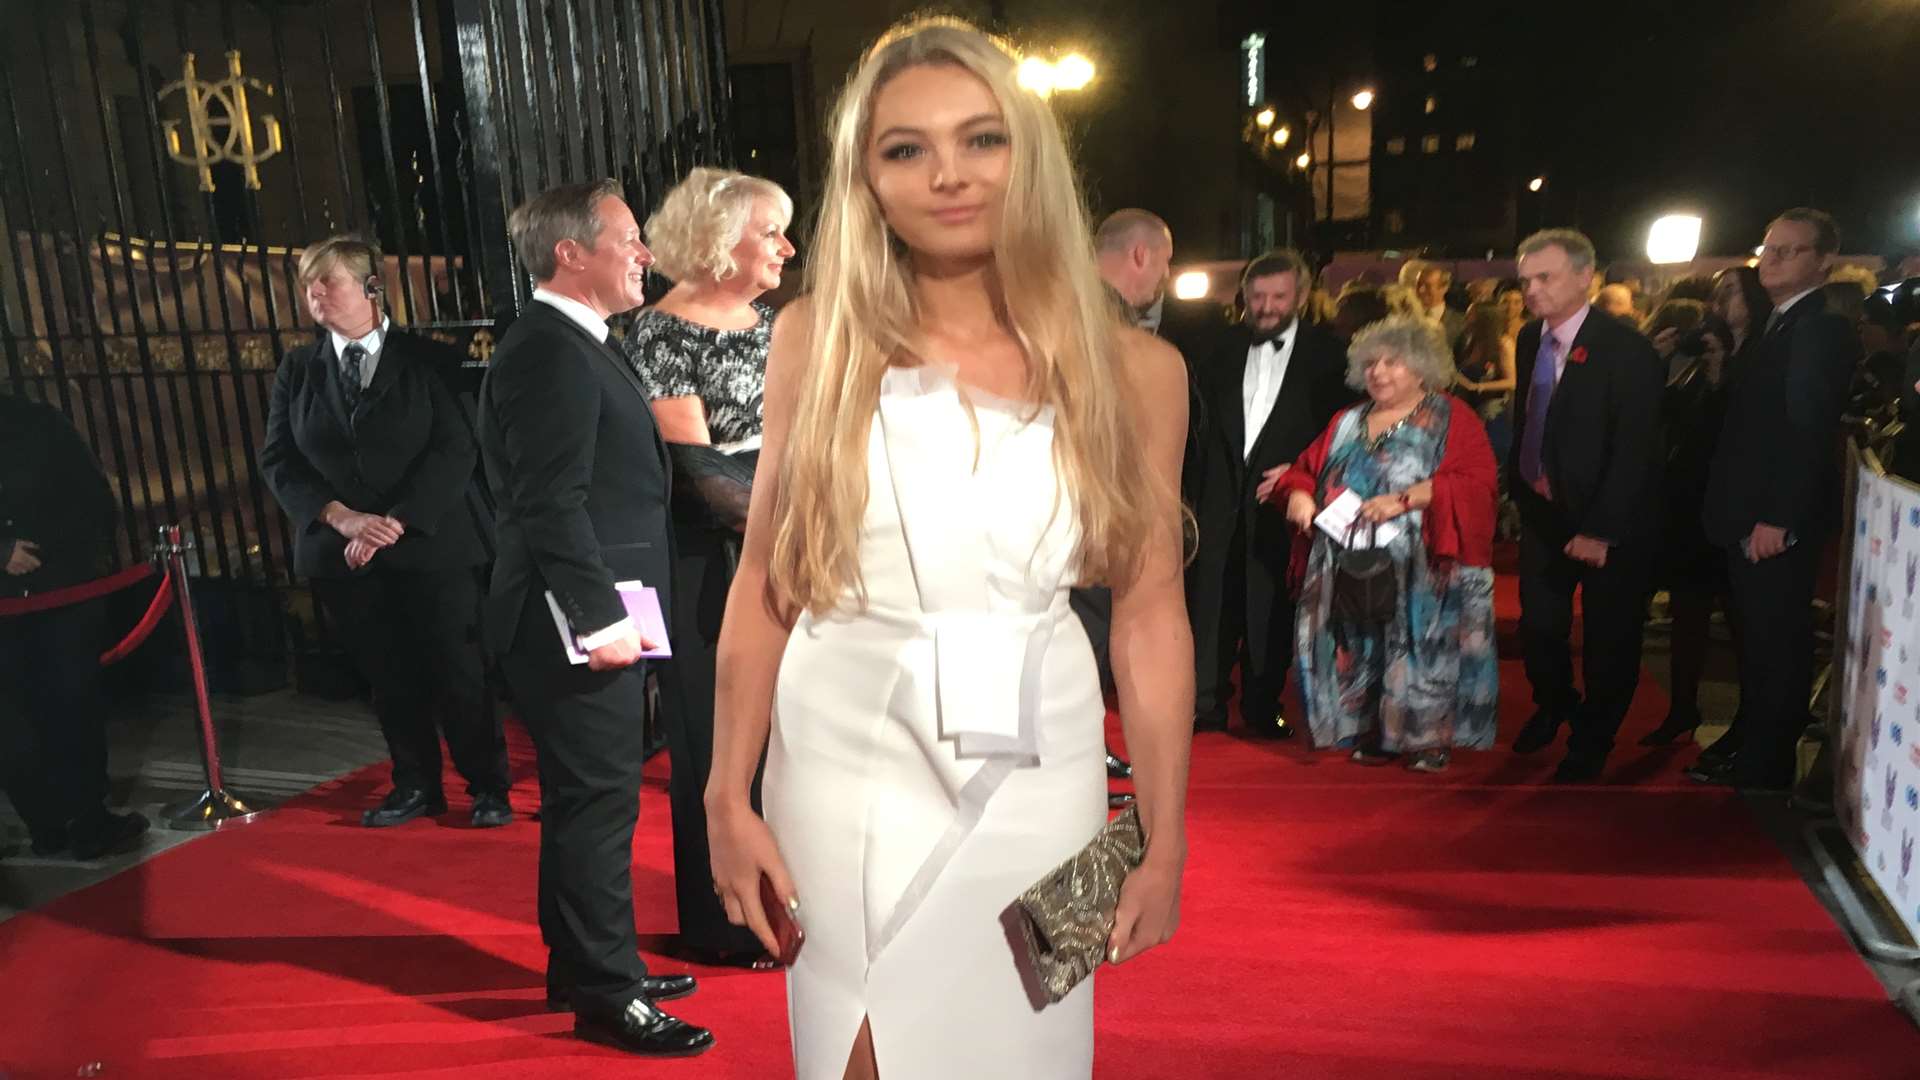 Shelby Newstead walks the red carpet at the Pride of Britain Awards